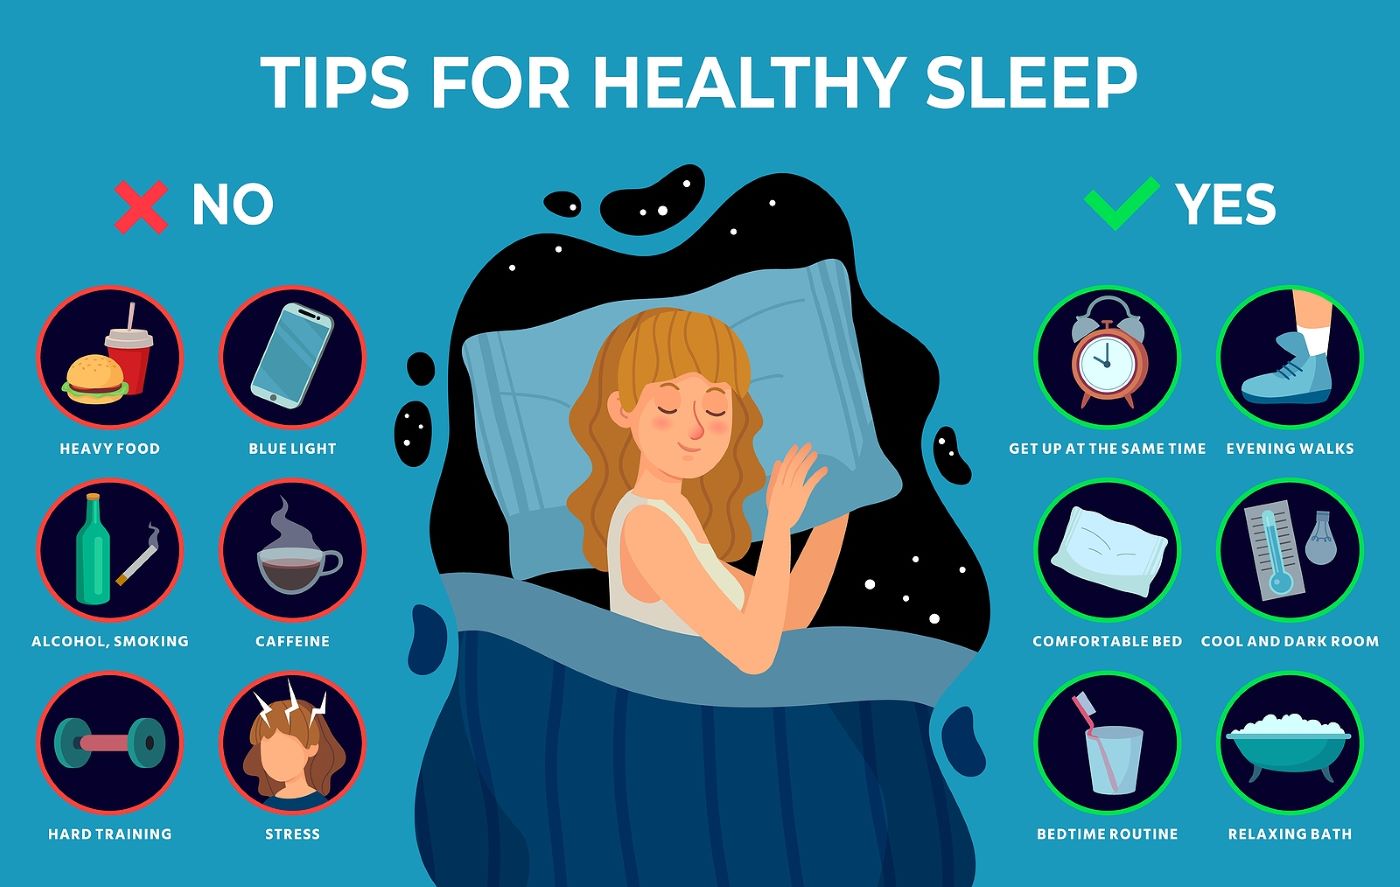 Why is sleep important for mental health and wellbeing